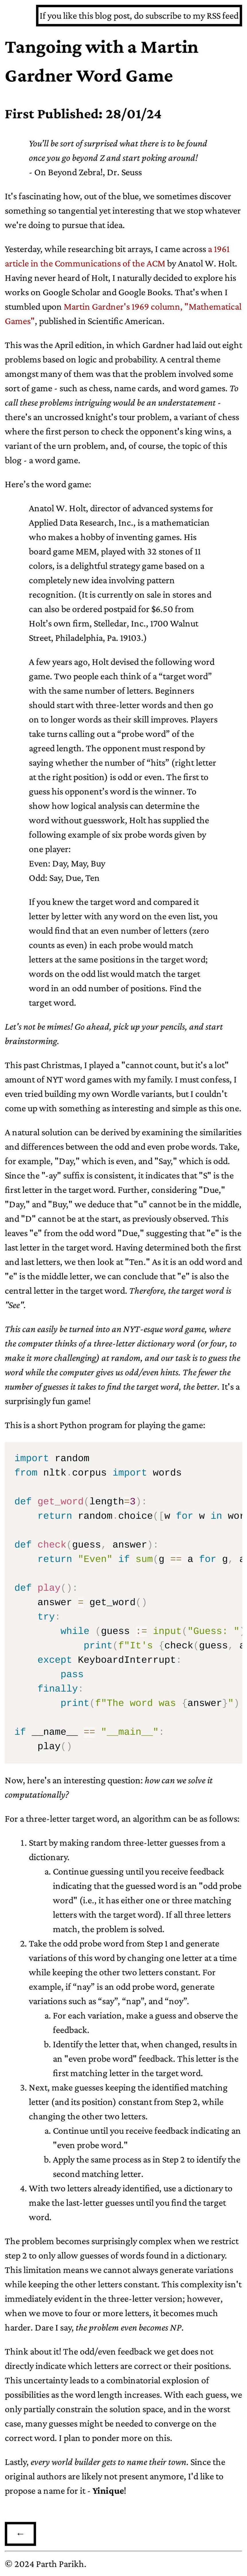 Tangoing with a Martin Gardner Word Game